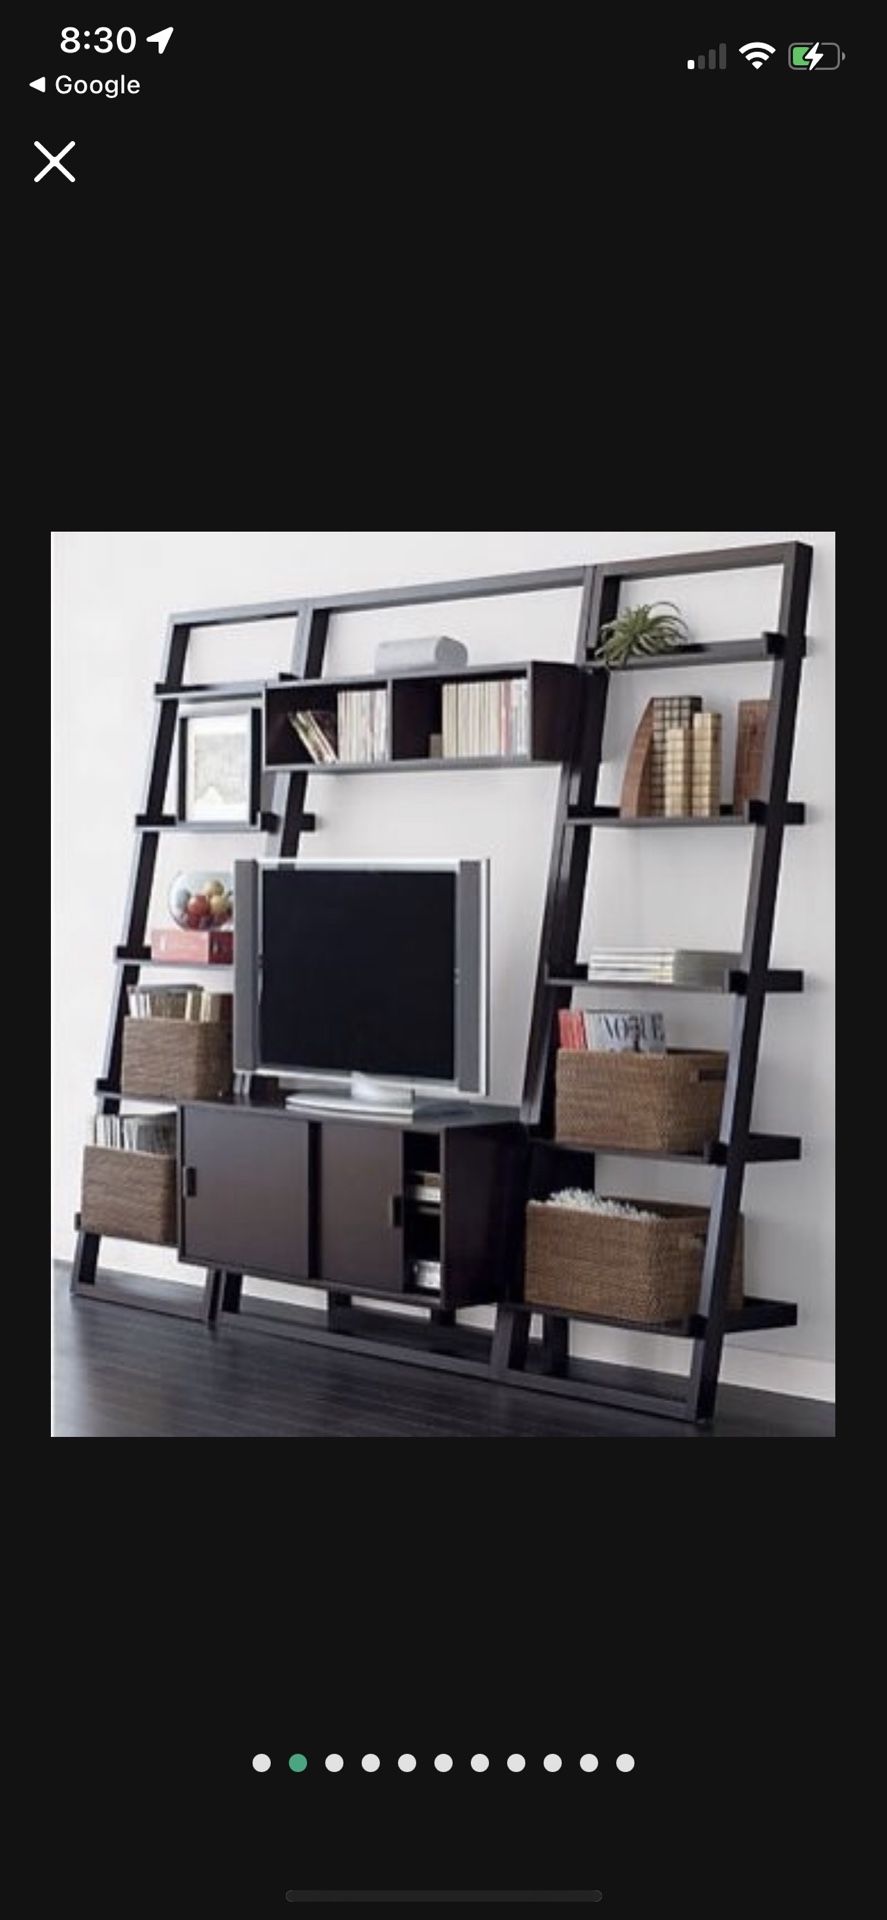 Crate And Barrel Sloane Leaning TV Stand - Espresso Color